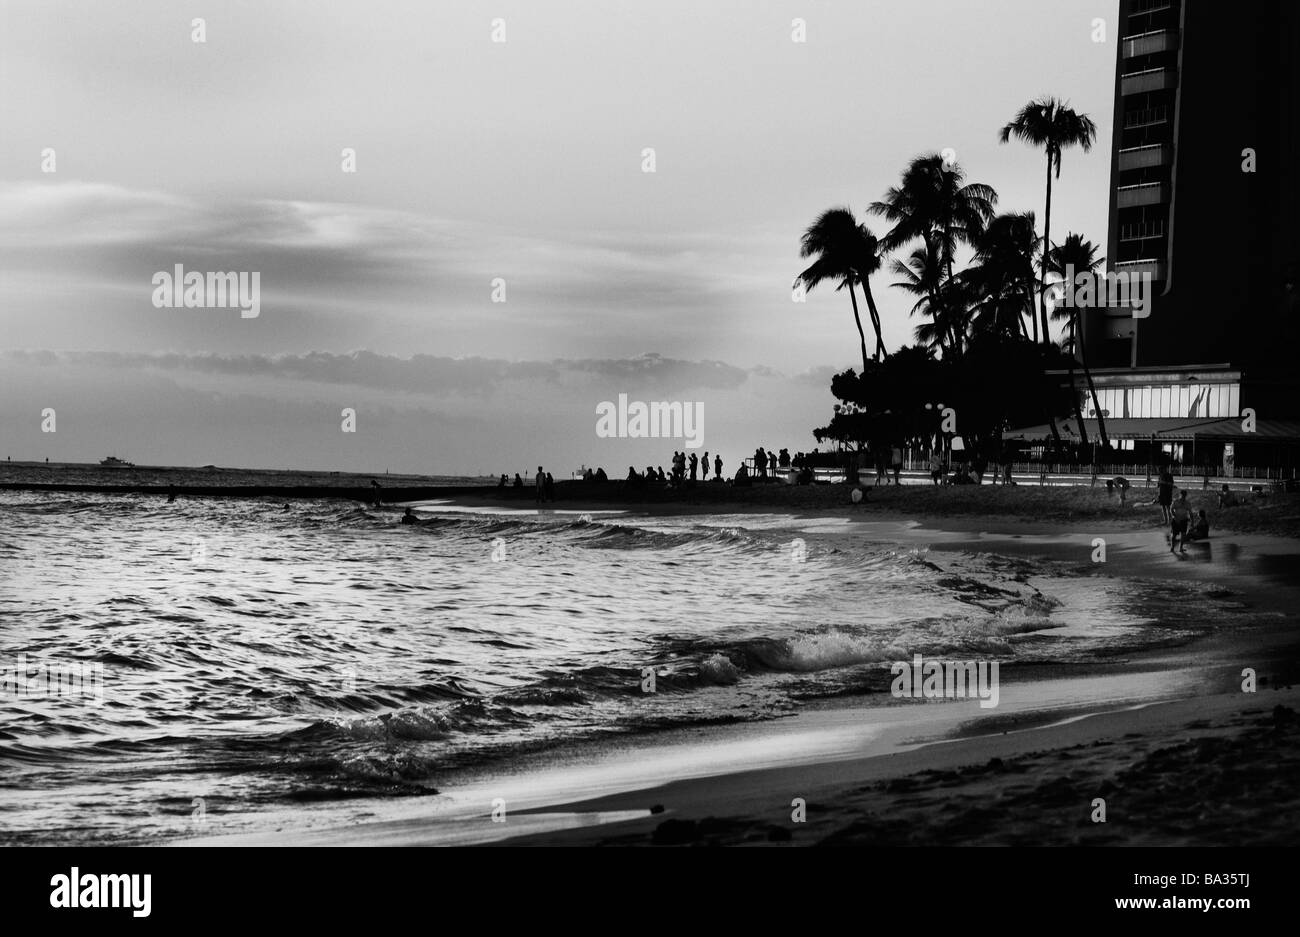 Sunset twilight silhouette at the beach of people vacationing  in Waikiki Hawaii. Stock Photo